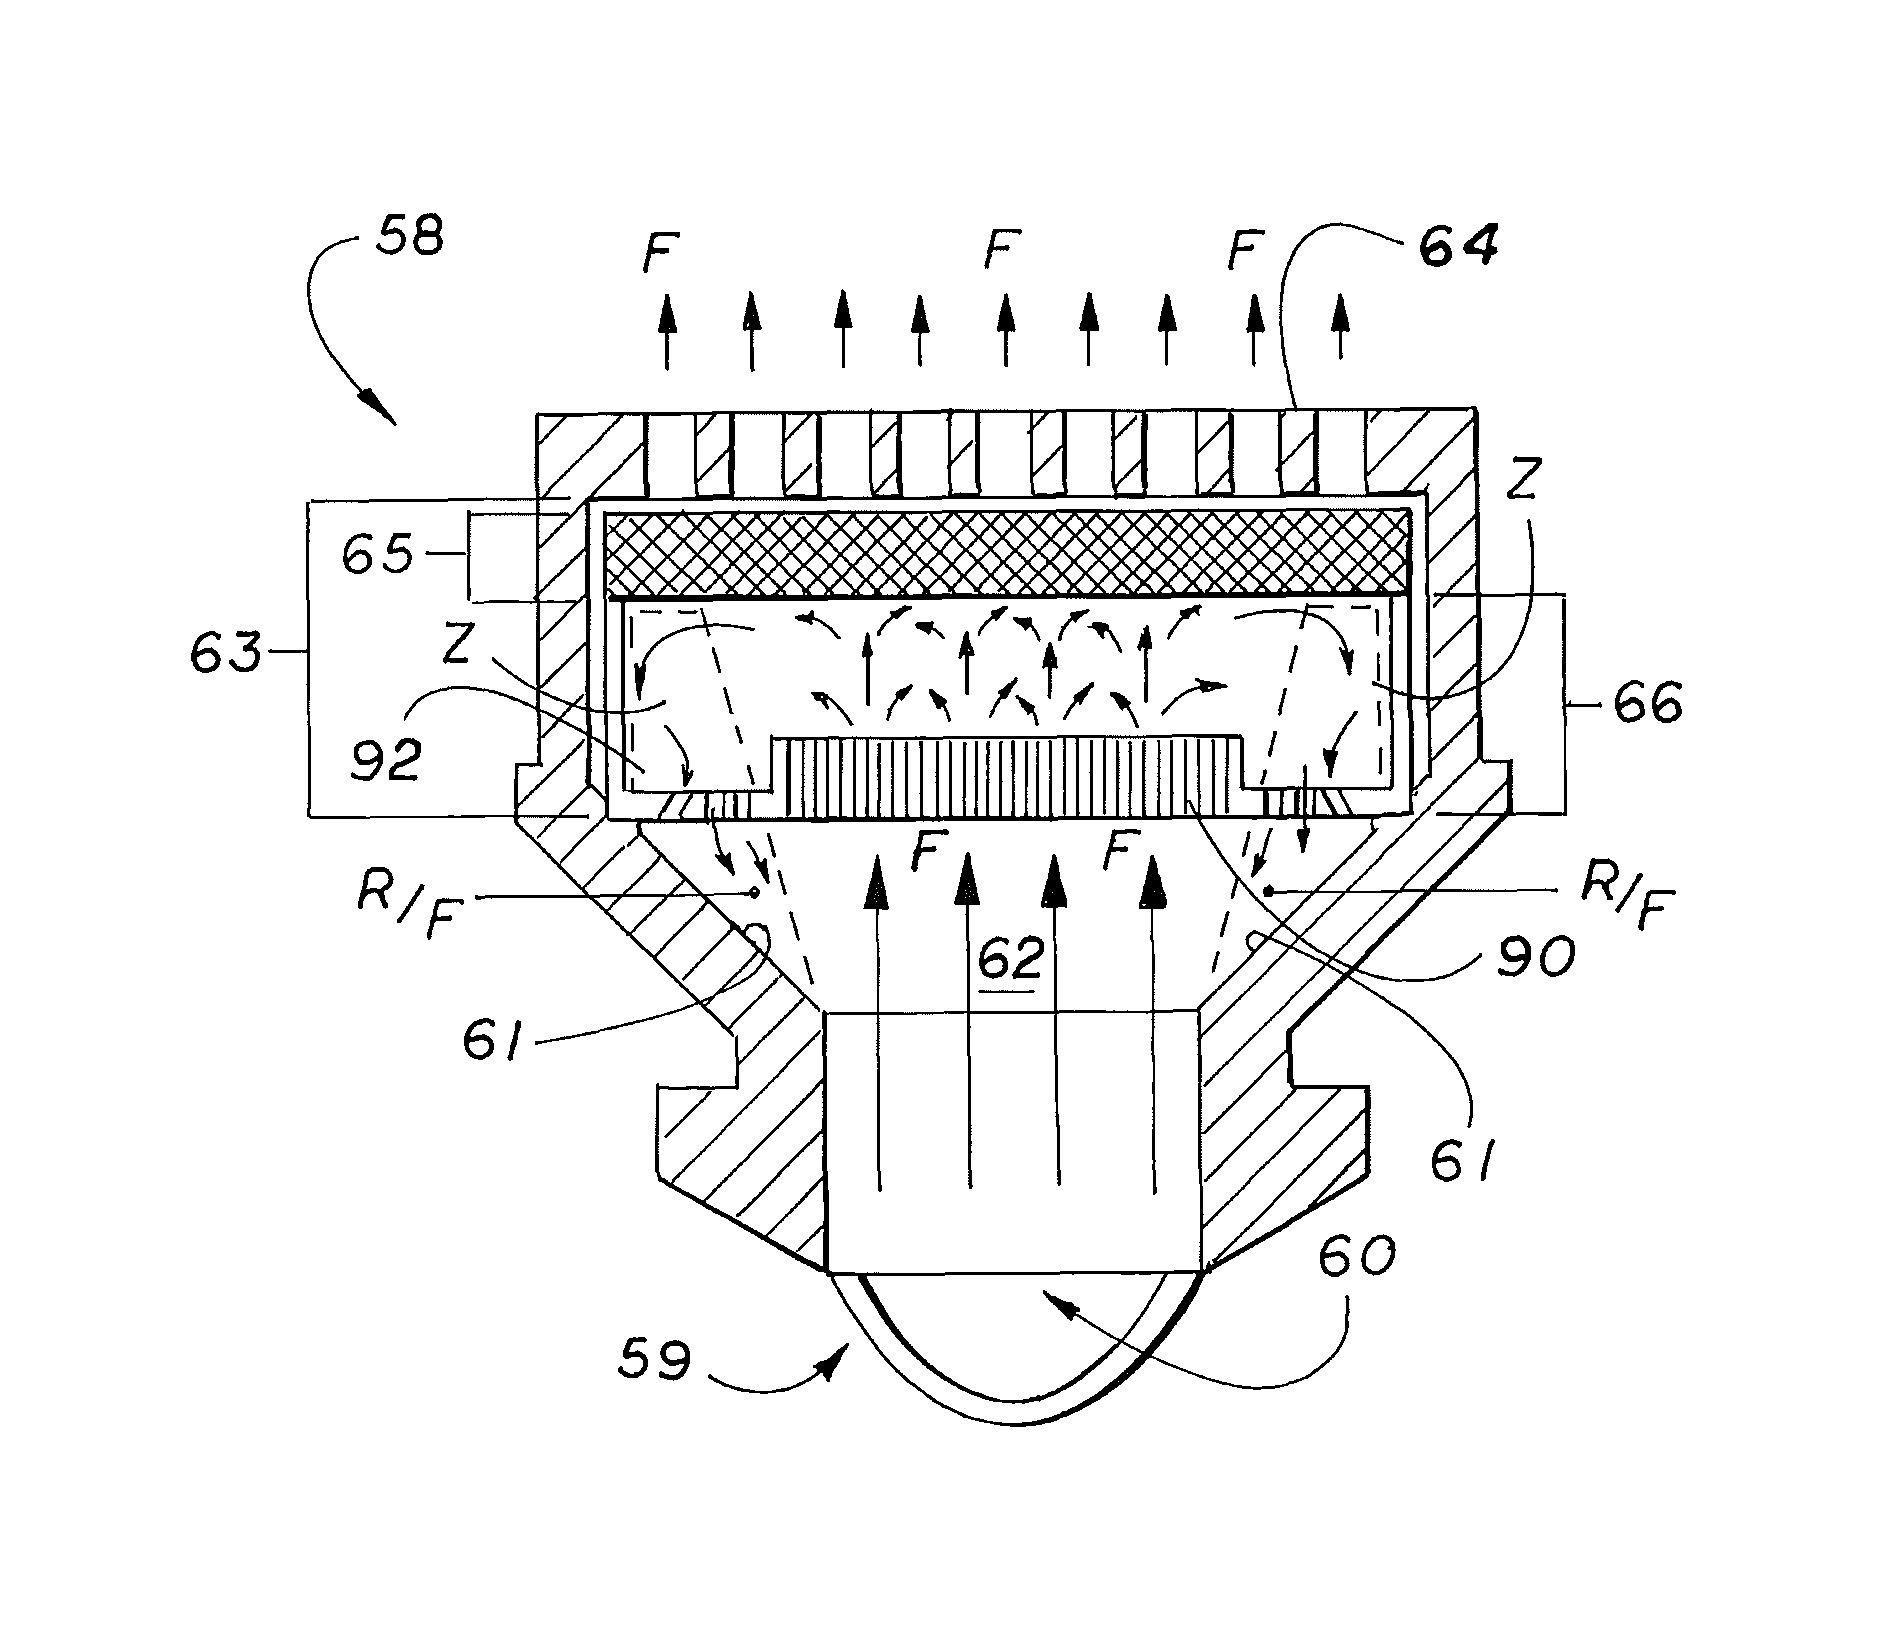 Debris exclusion and retention device for a fuel assembly